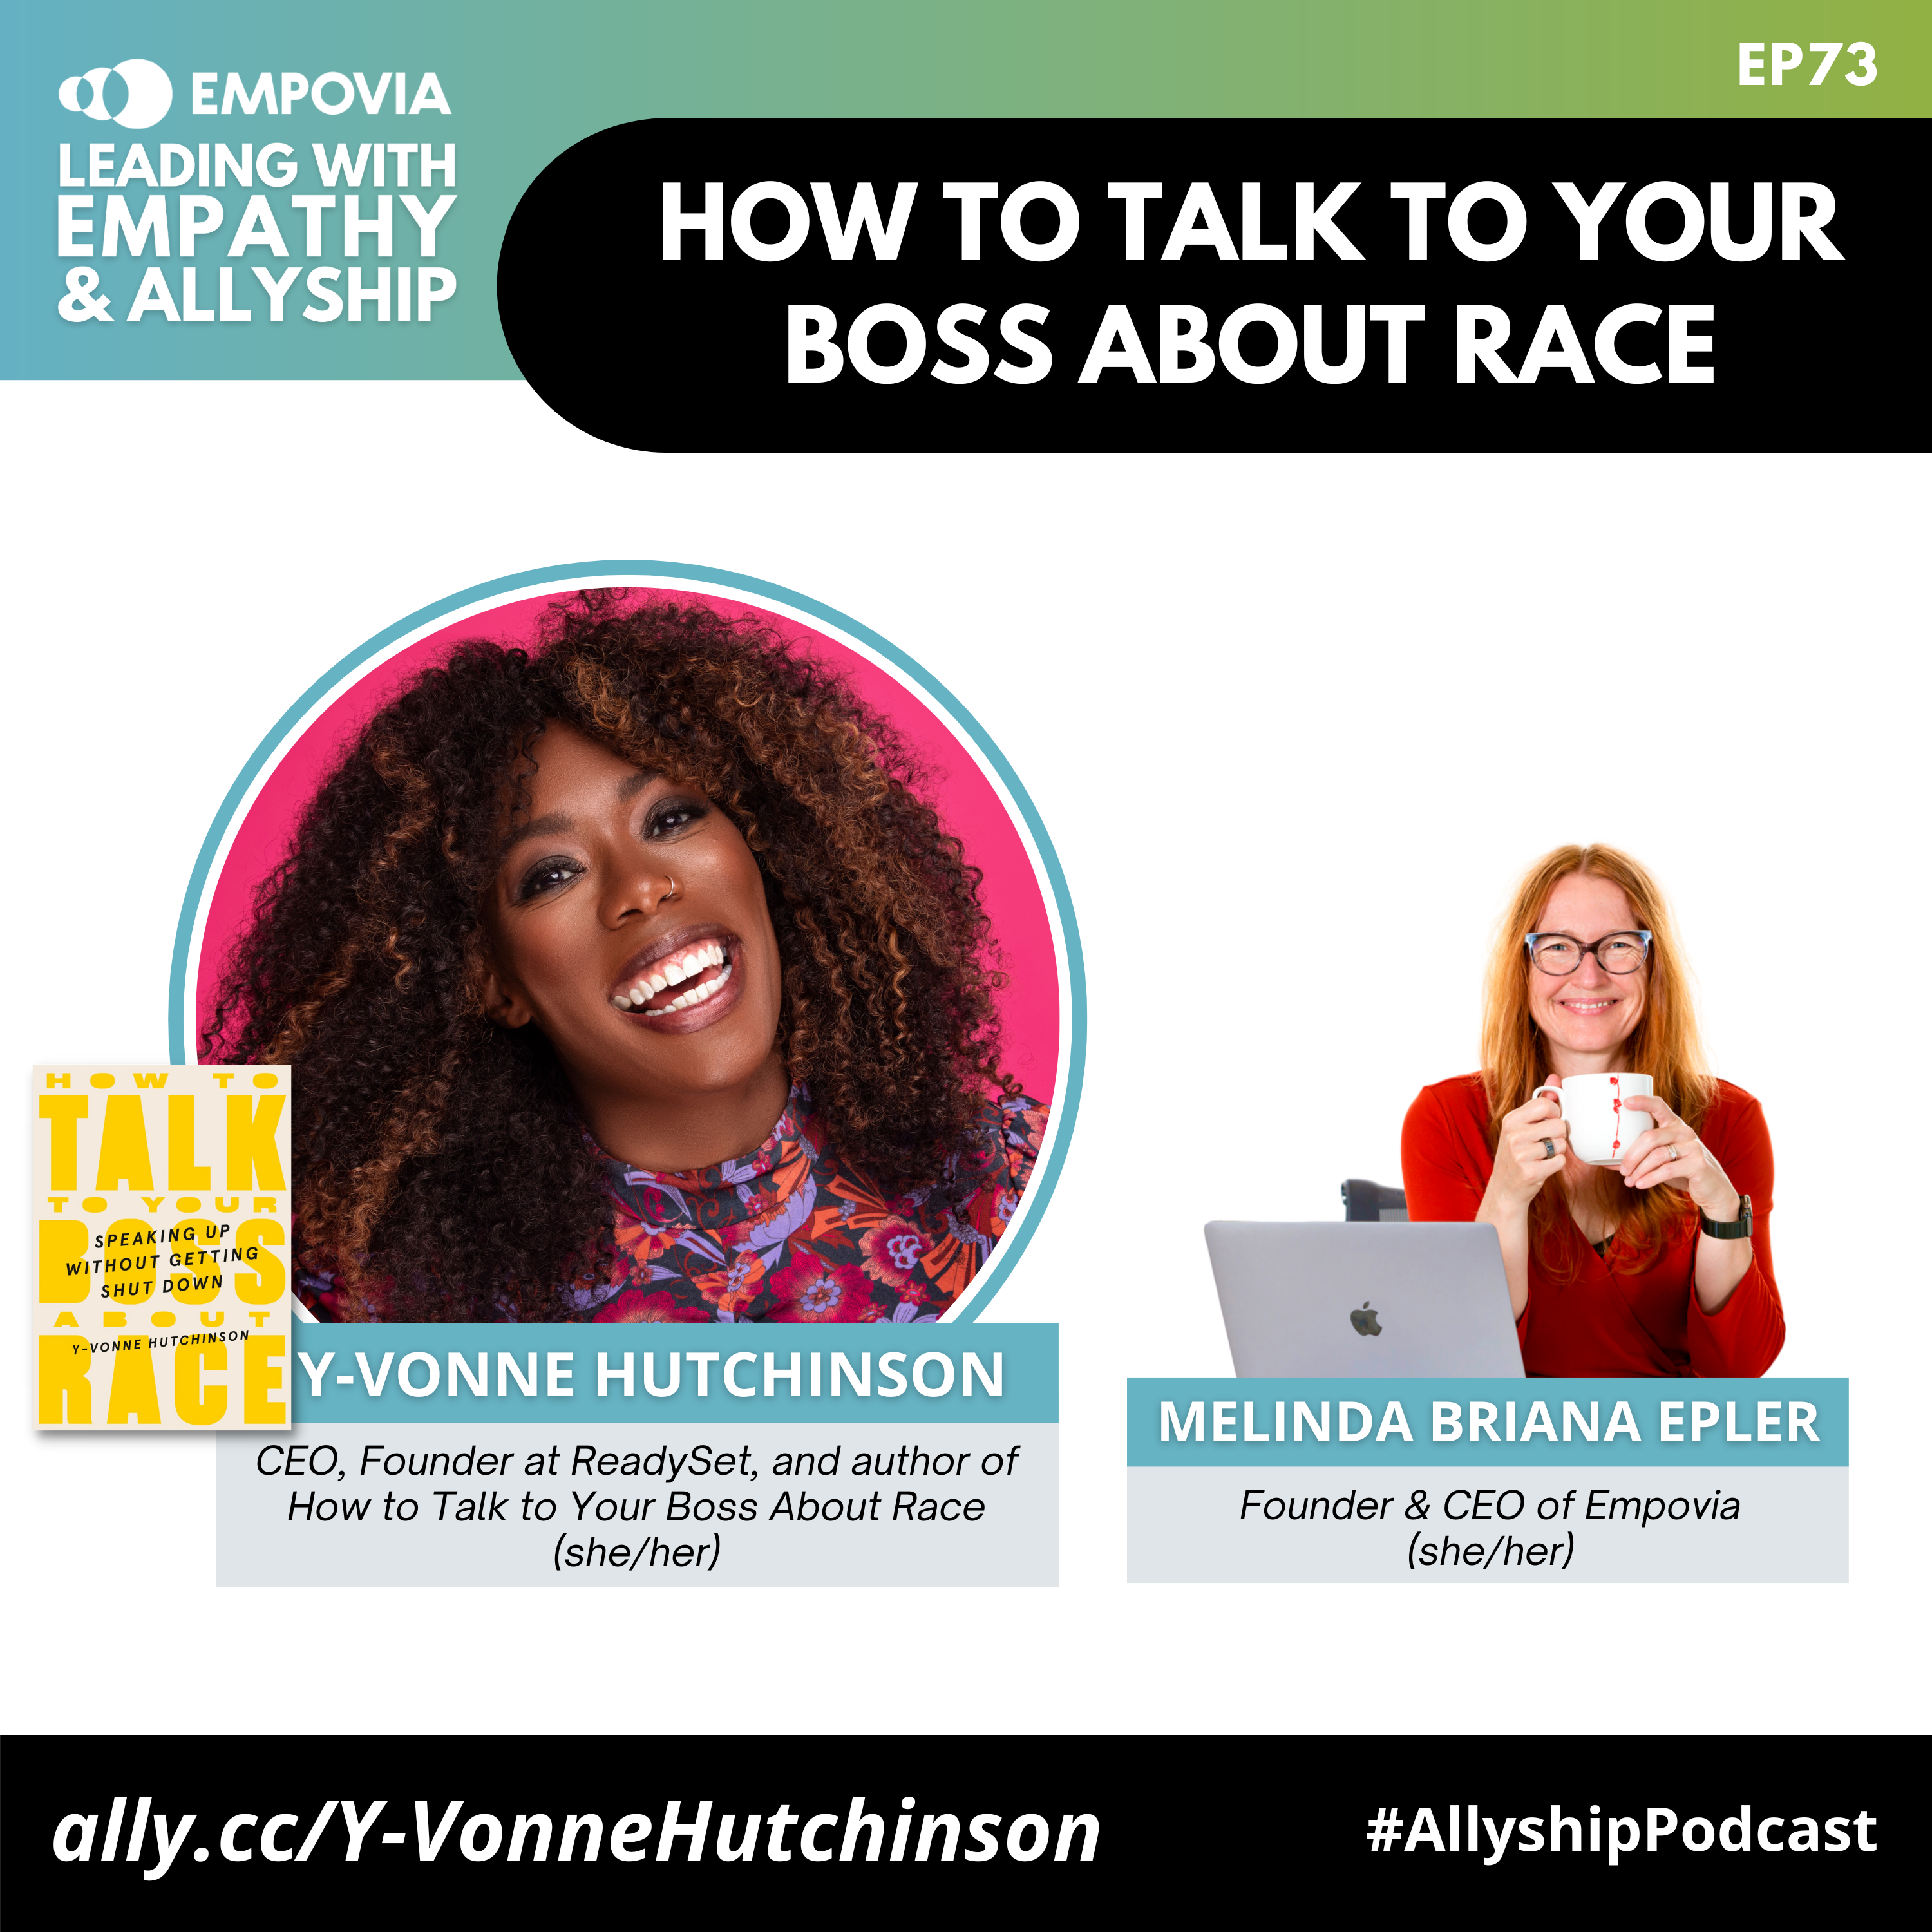 Leading With Empathy & Allyship promo with the Empovia logo and photos of Y-Vonne Hutchinson, an African-American woman with brown curly hair who is wearing a multicolored floral top and smiling at the camera; the cream cover of her book that reads “How to Talk to Your Boss About Race” in big yellow text; and host Melinda Briana Epler, a White woman with red hair, glasses, and an orange shirt holding a white mug behind a laptop.